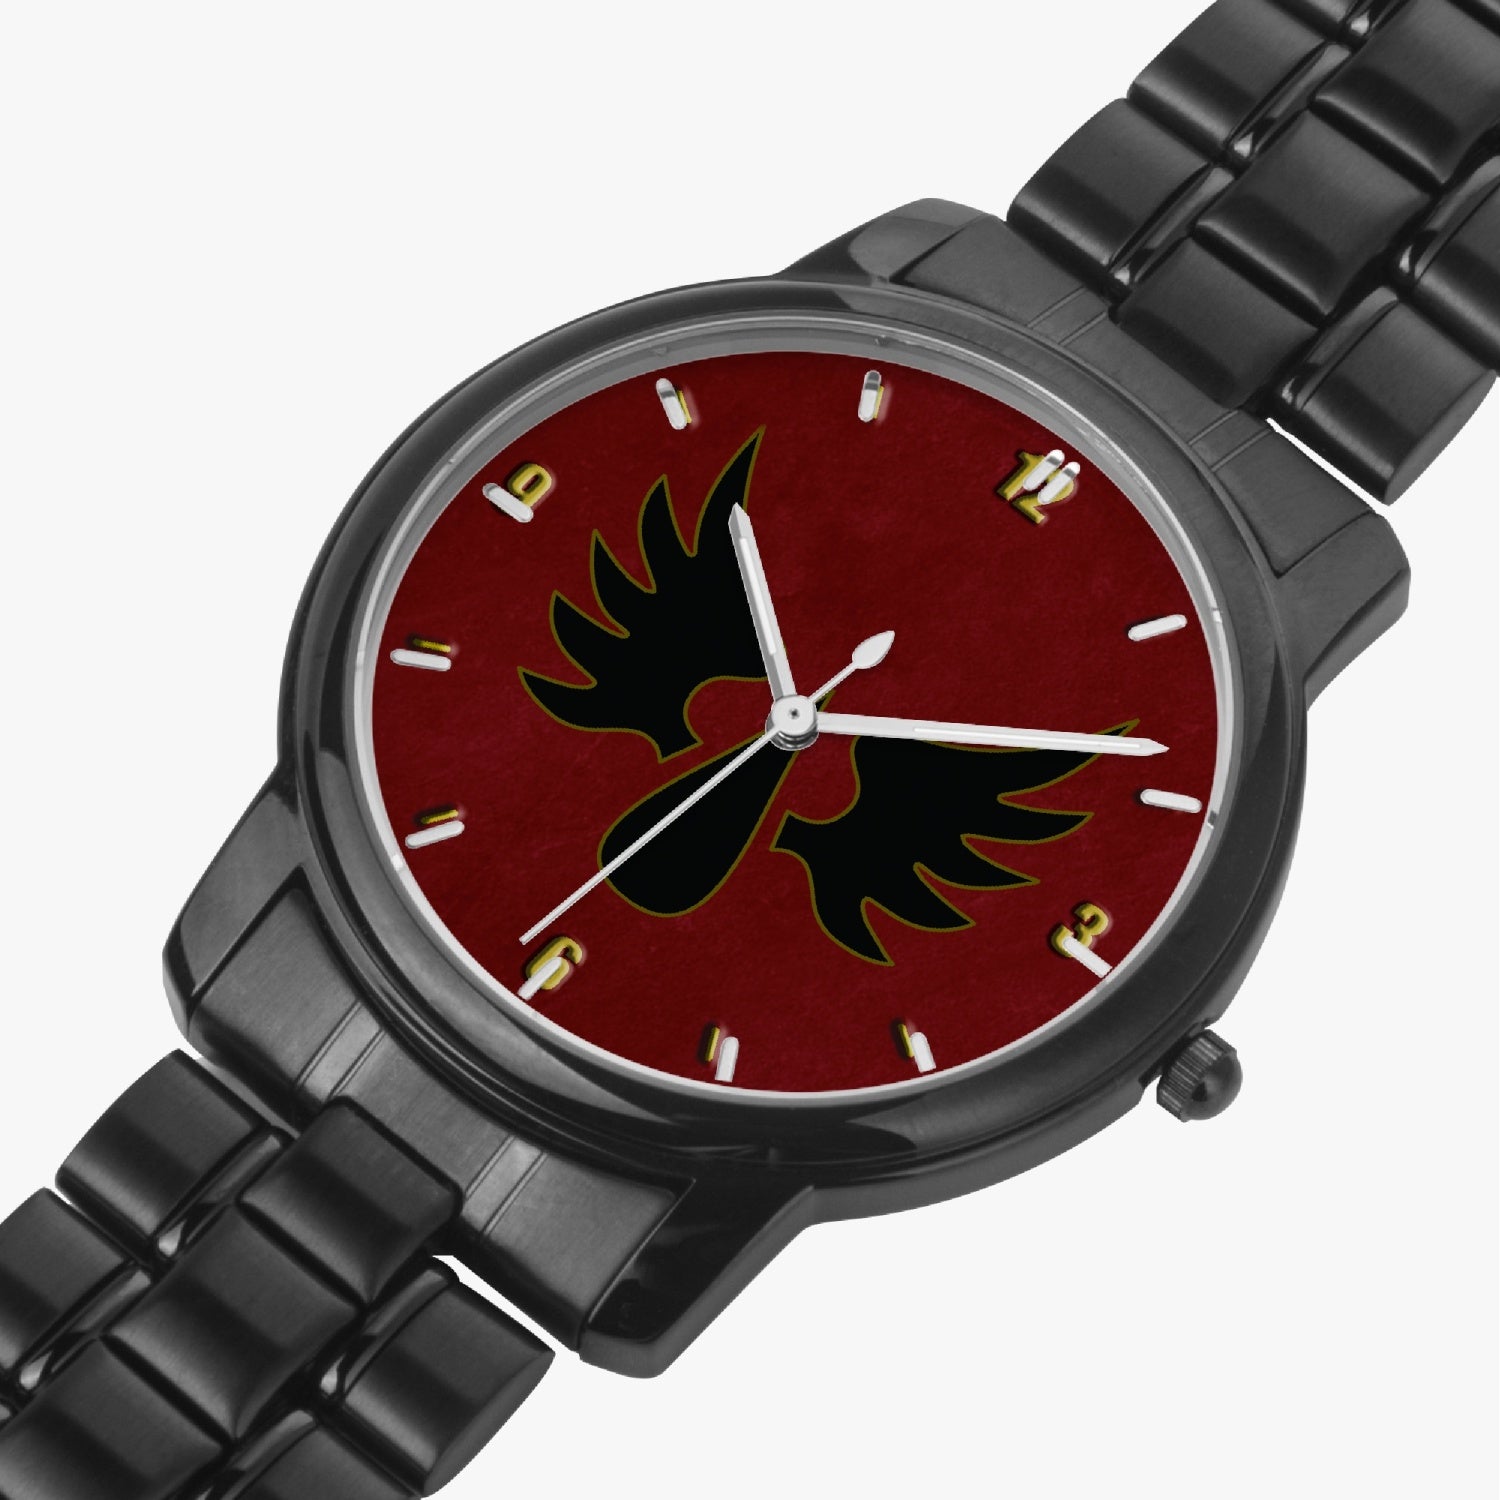 Blood Angels | Folding Clasp | Stainless Steel Quartz Watch (With Indicators)